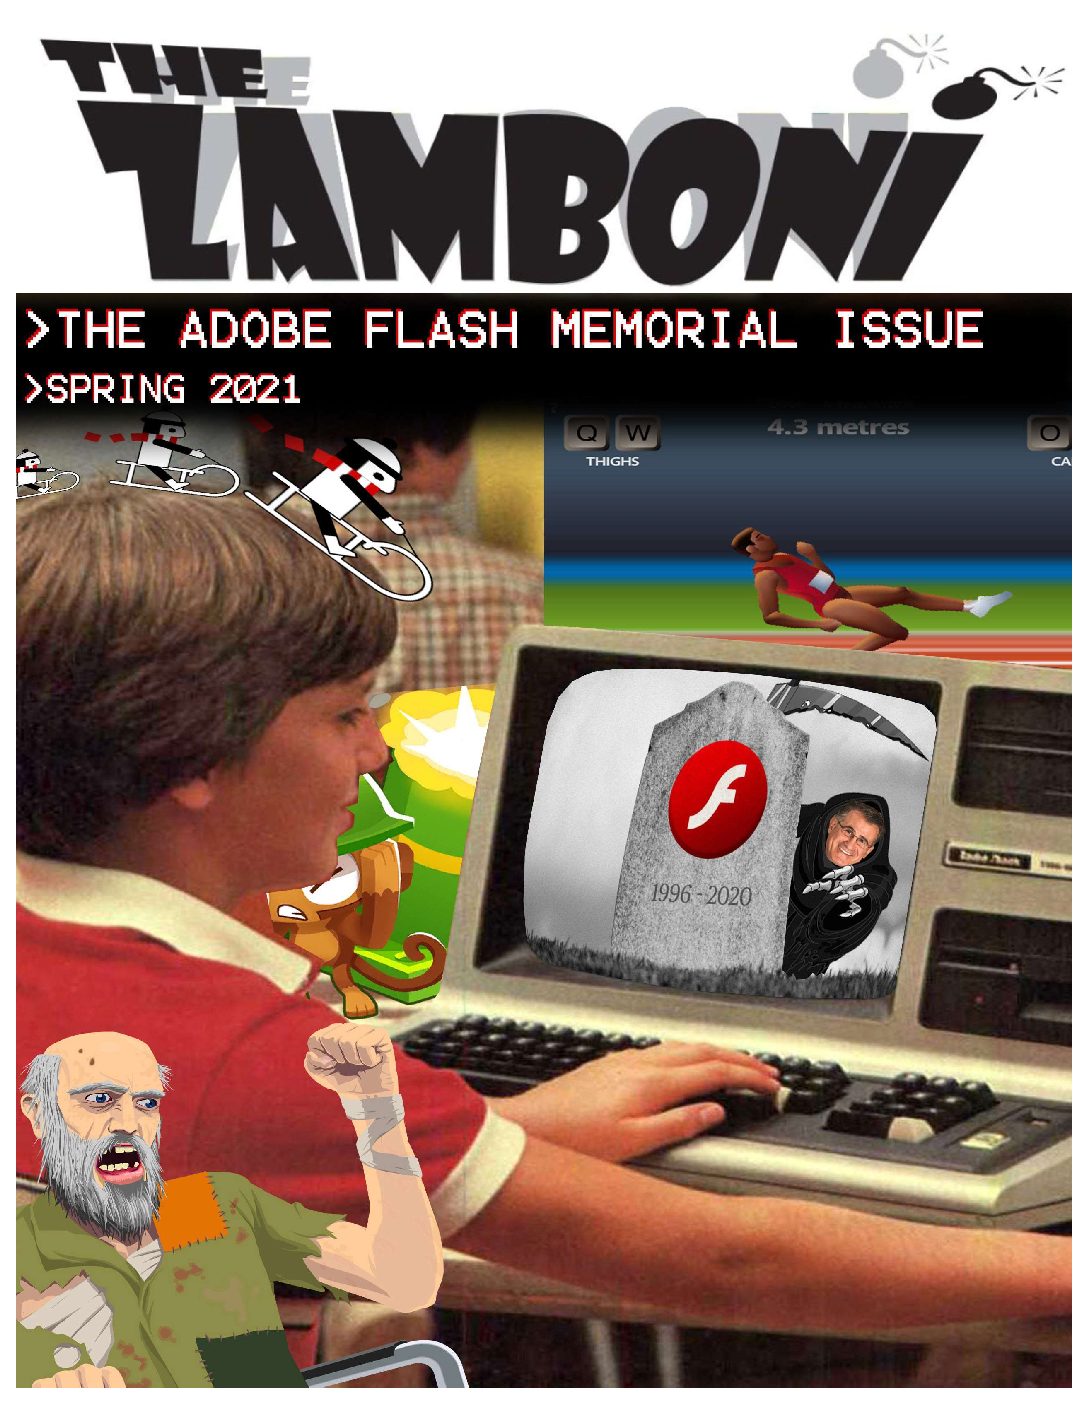 The Adobe Flash Memorial Issue: Spring 2021